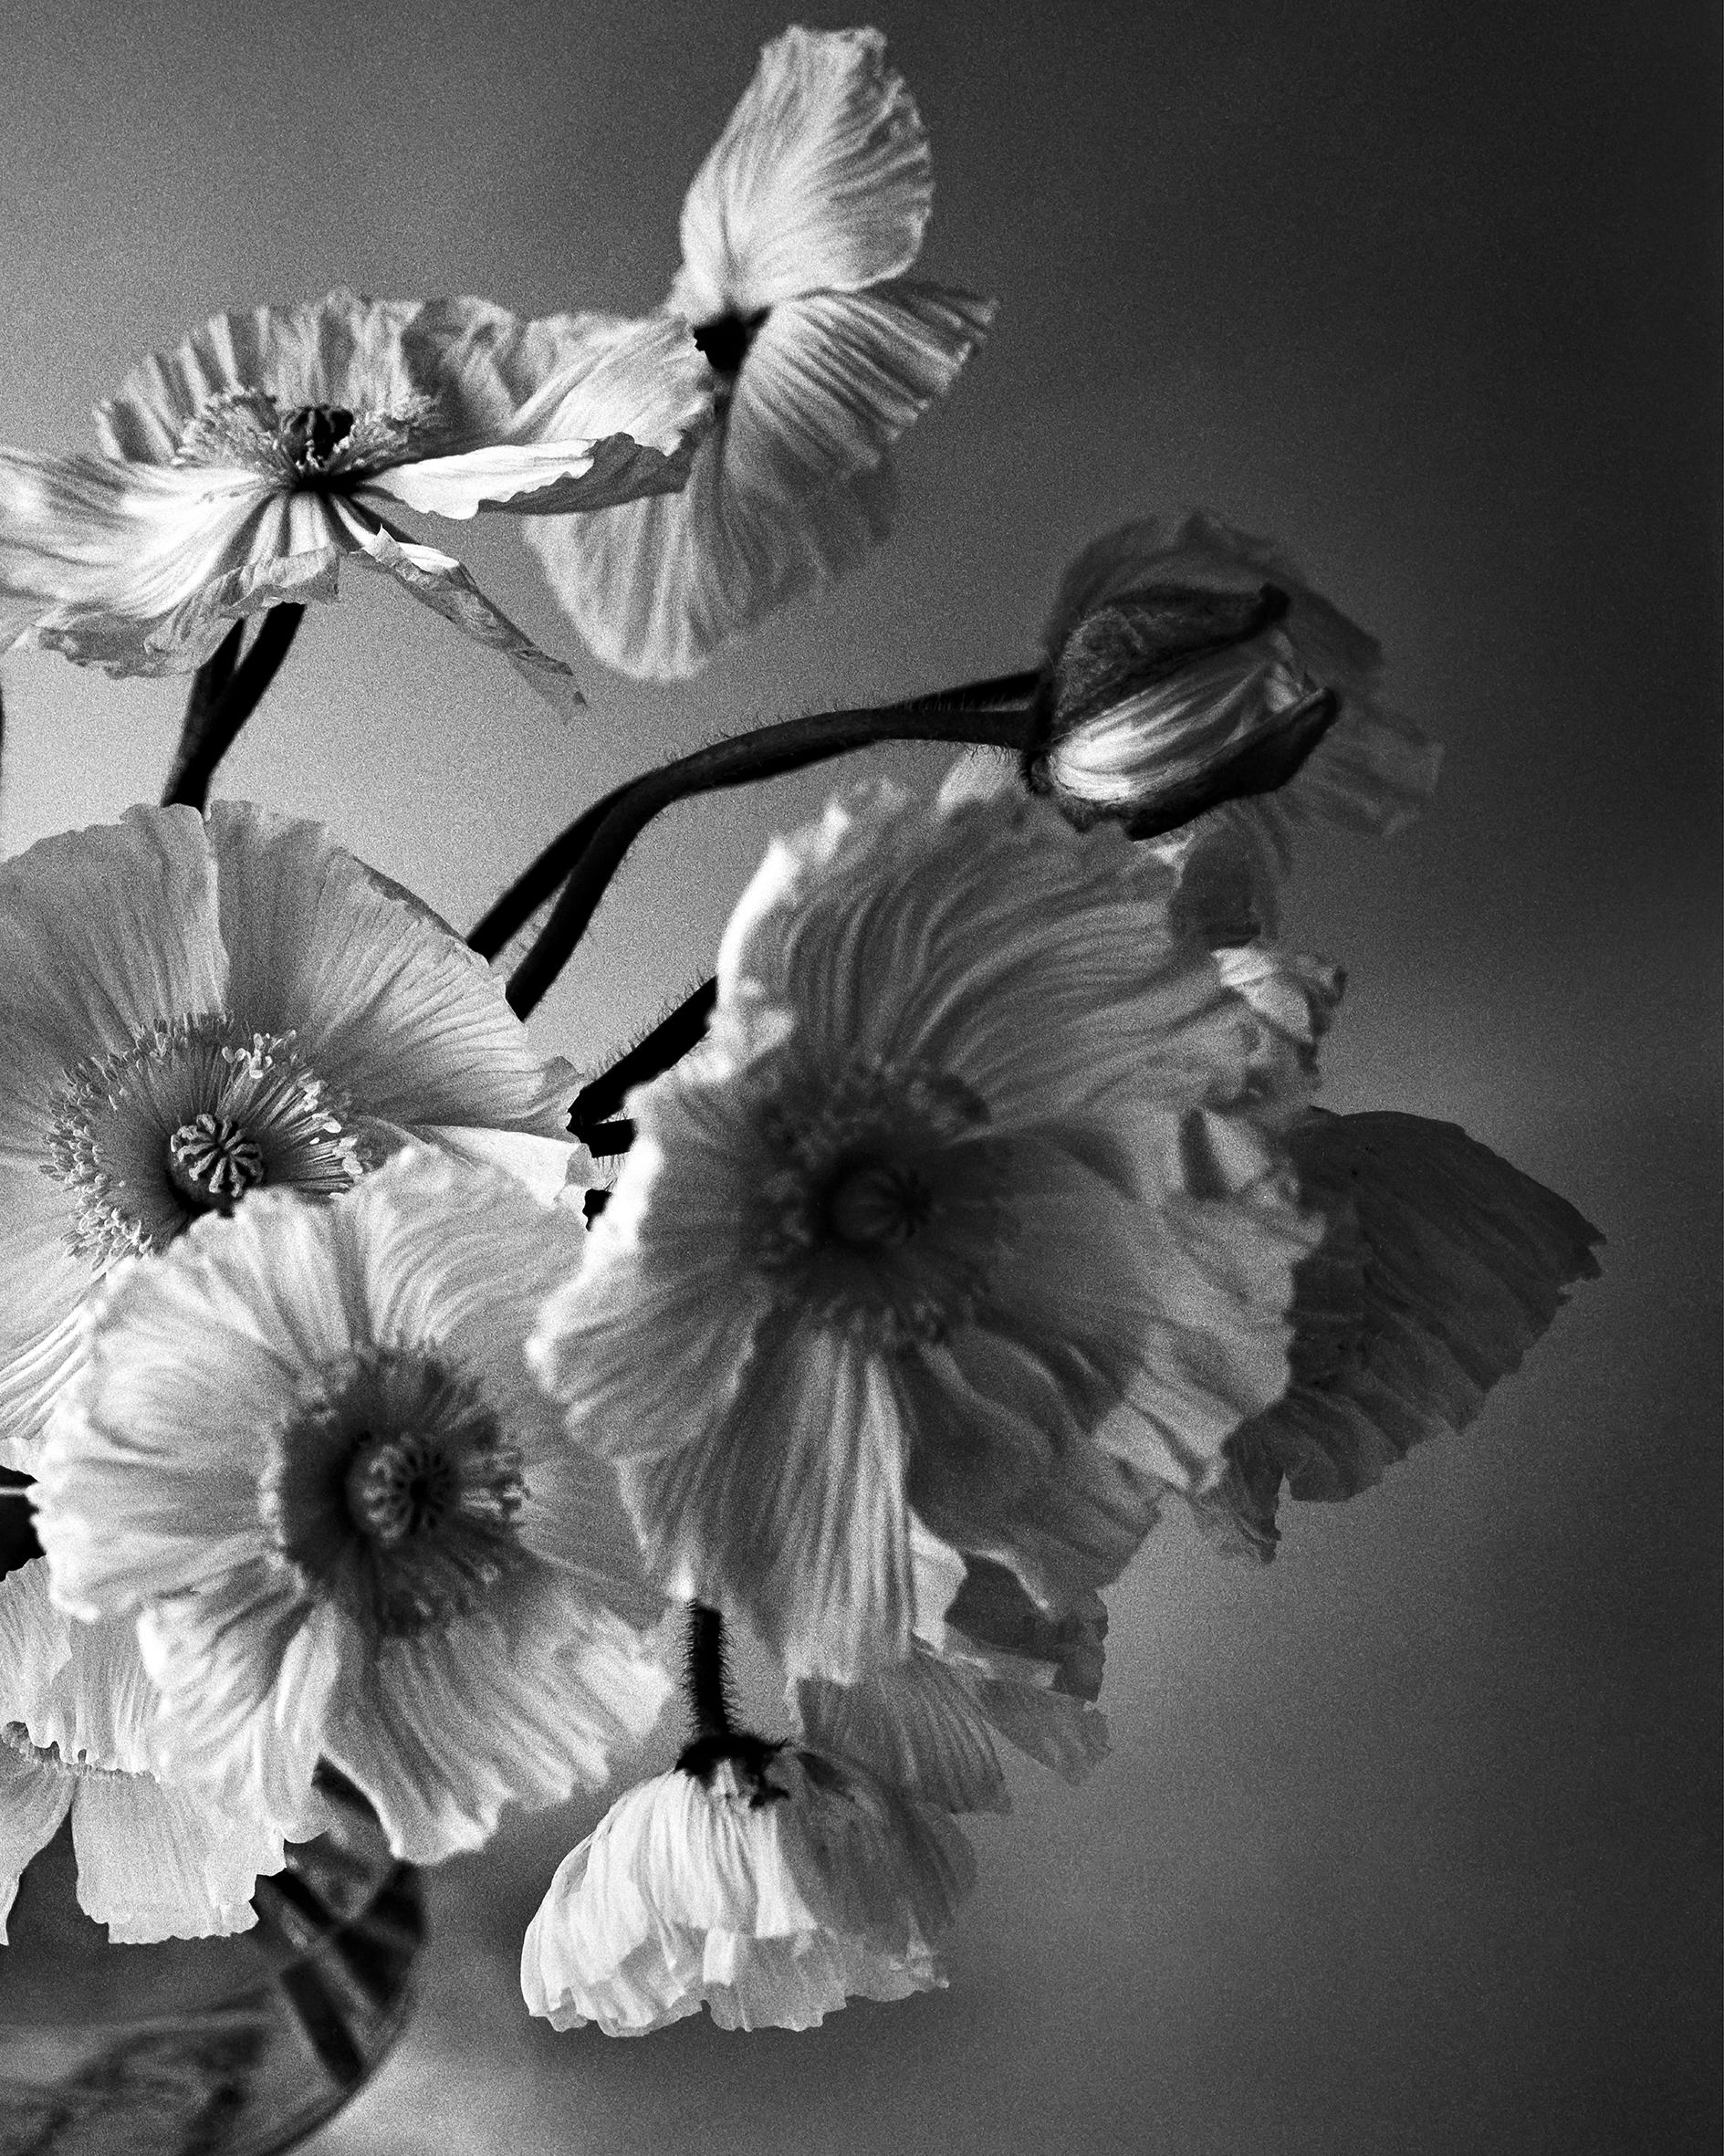 Poppy Bunch - Black and White analogue floral photography, Limited edition of 20 - Contemporary Photograph by Ugne Pouwell